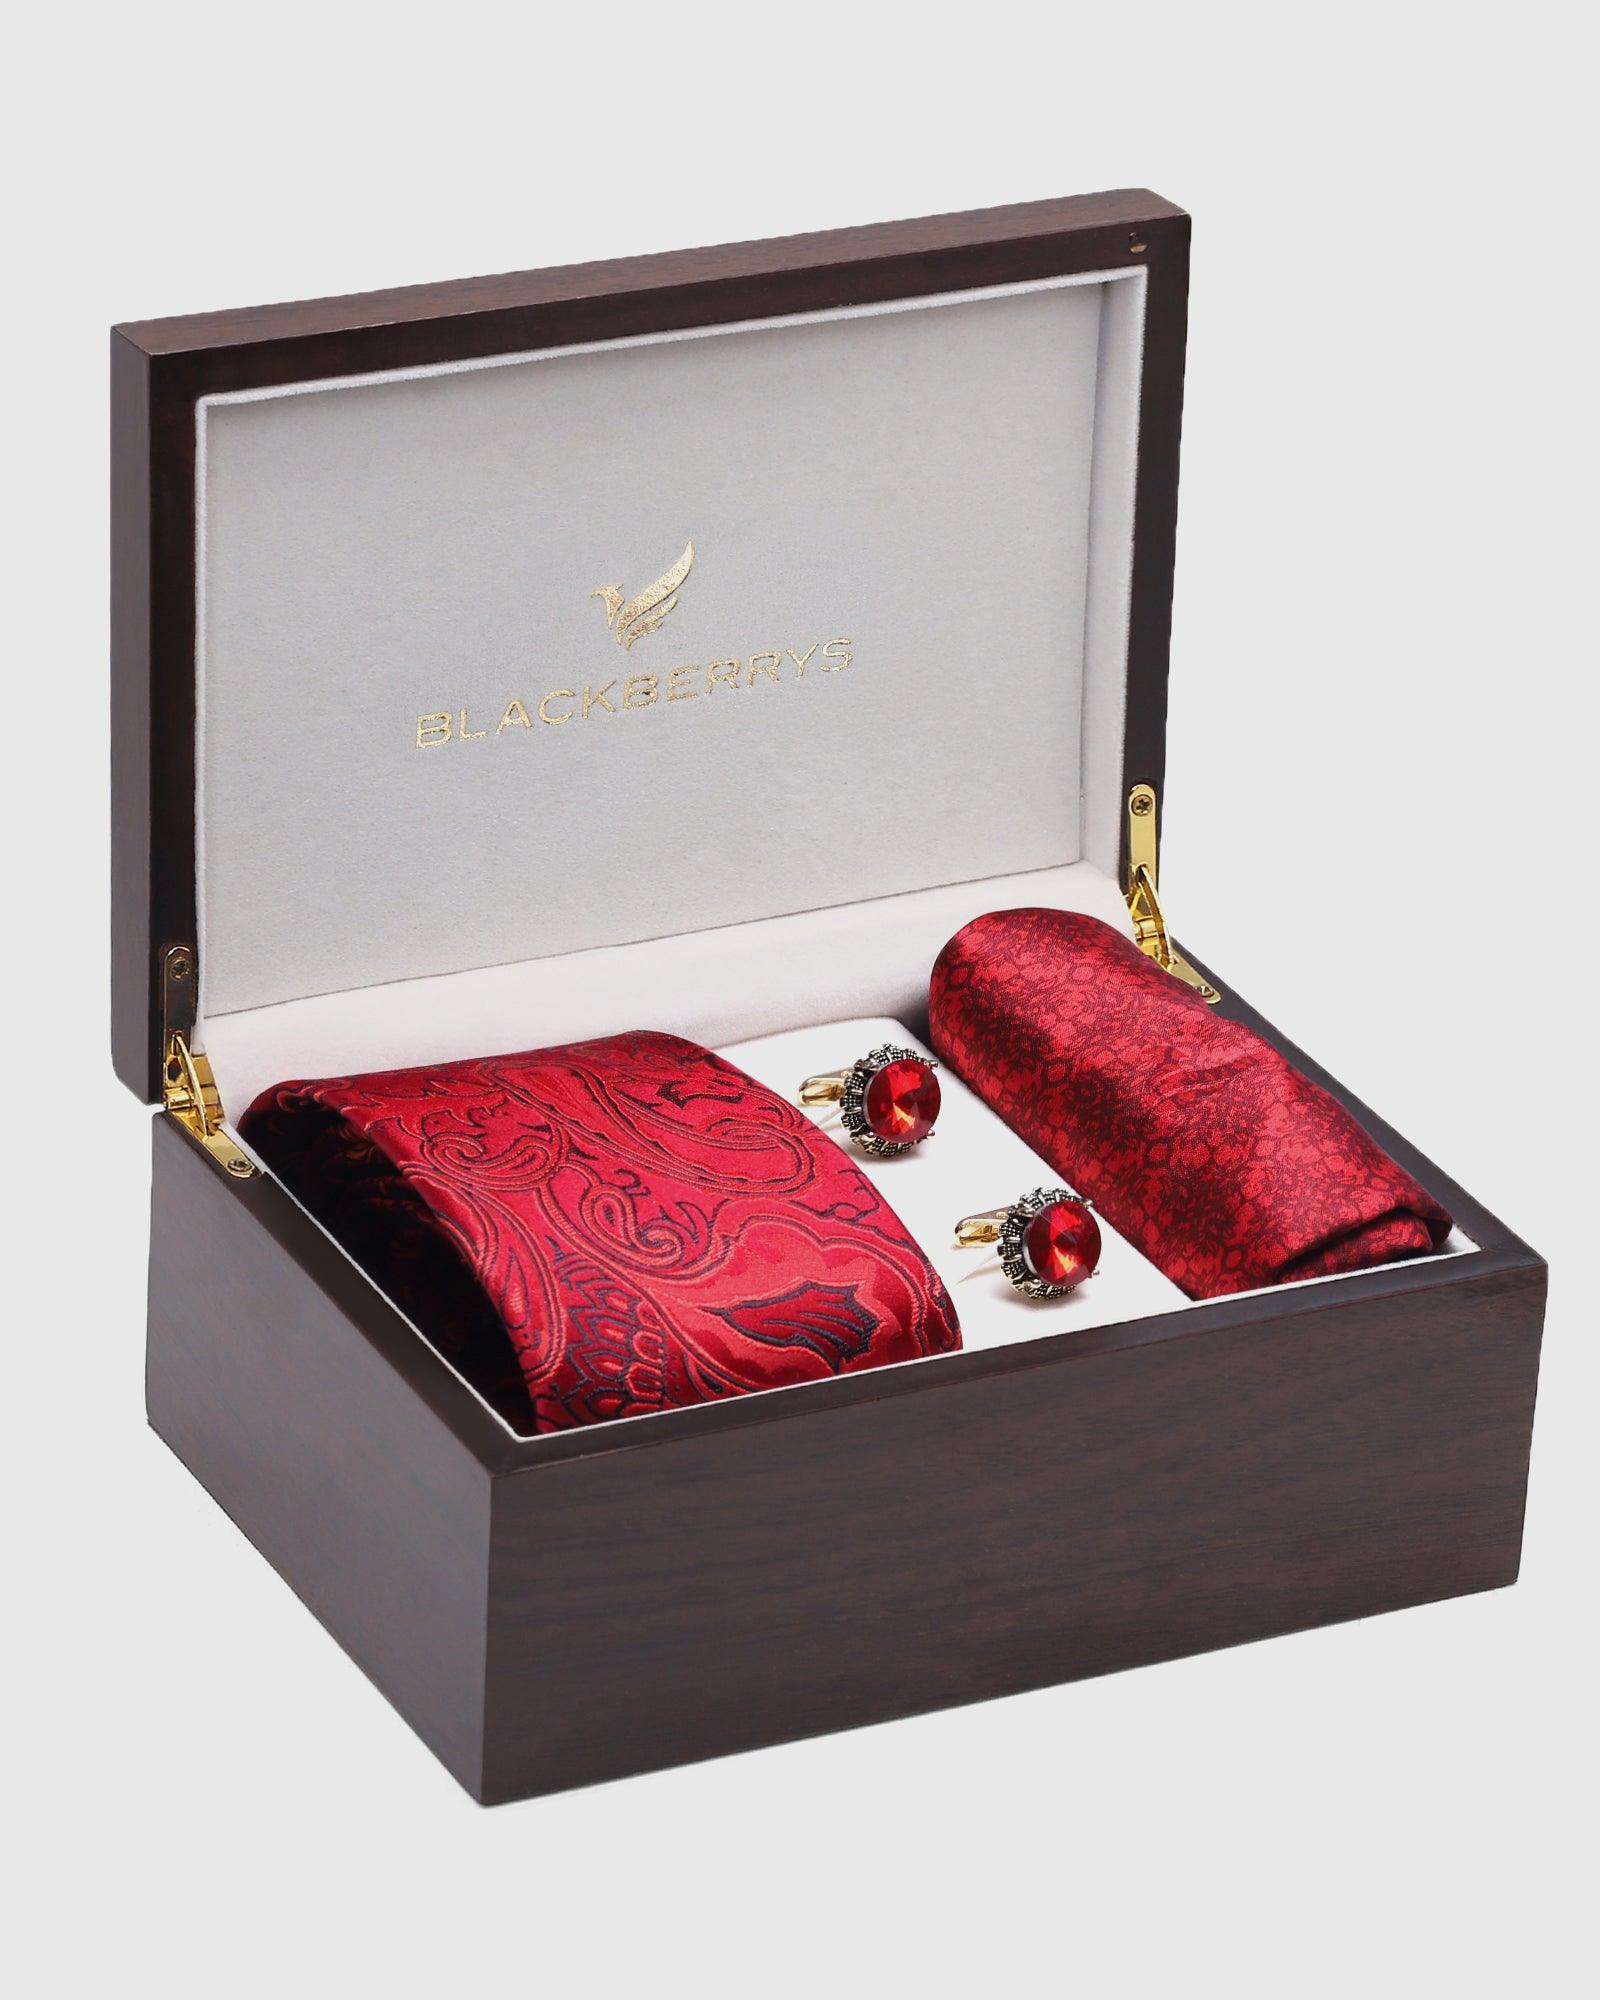 Boxed Combo Printed Tie With Pocket Square And Cufflink - Sarabic